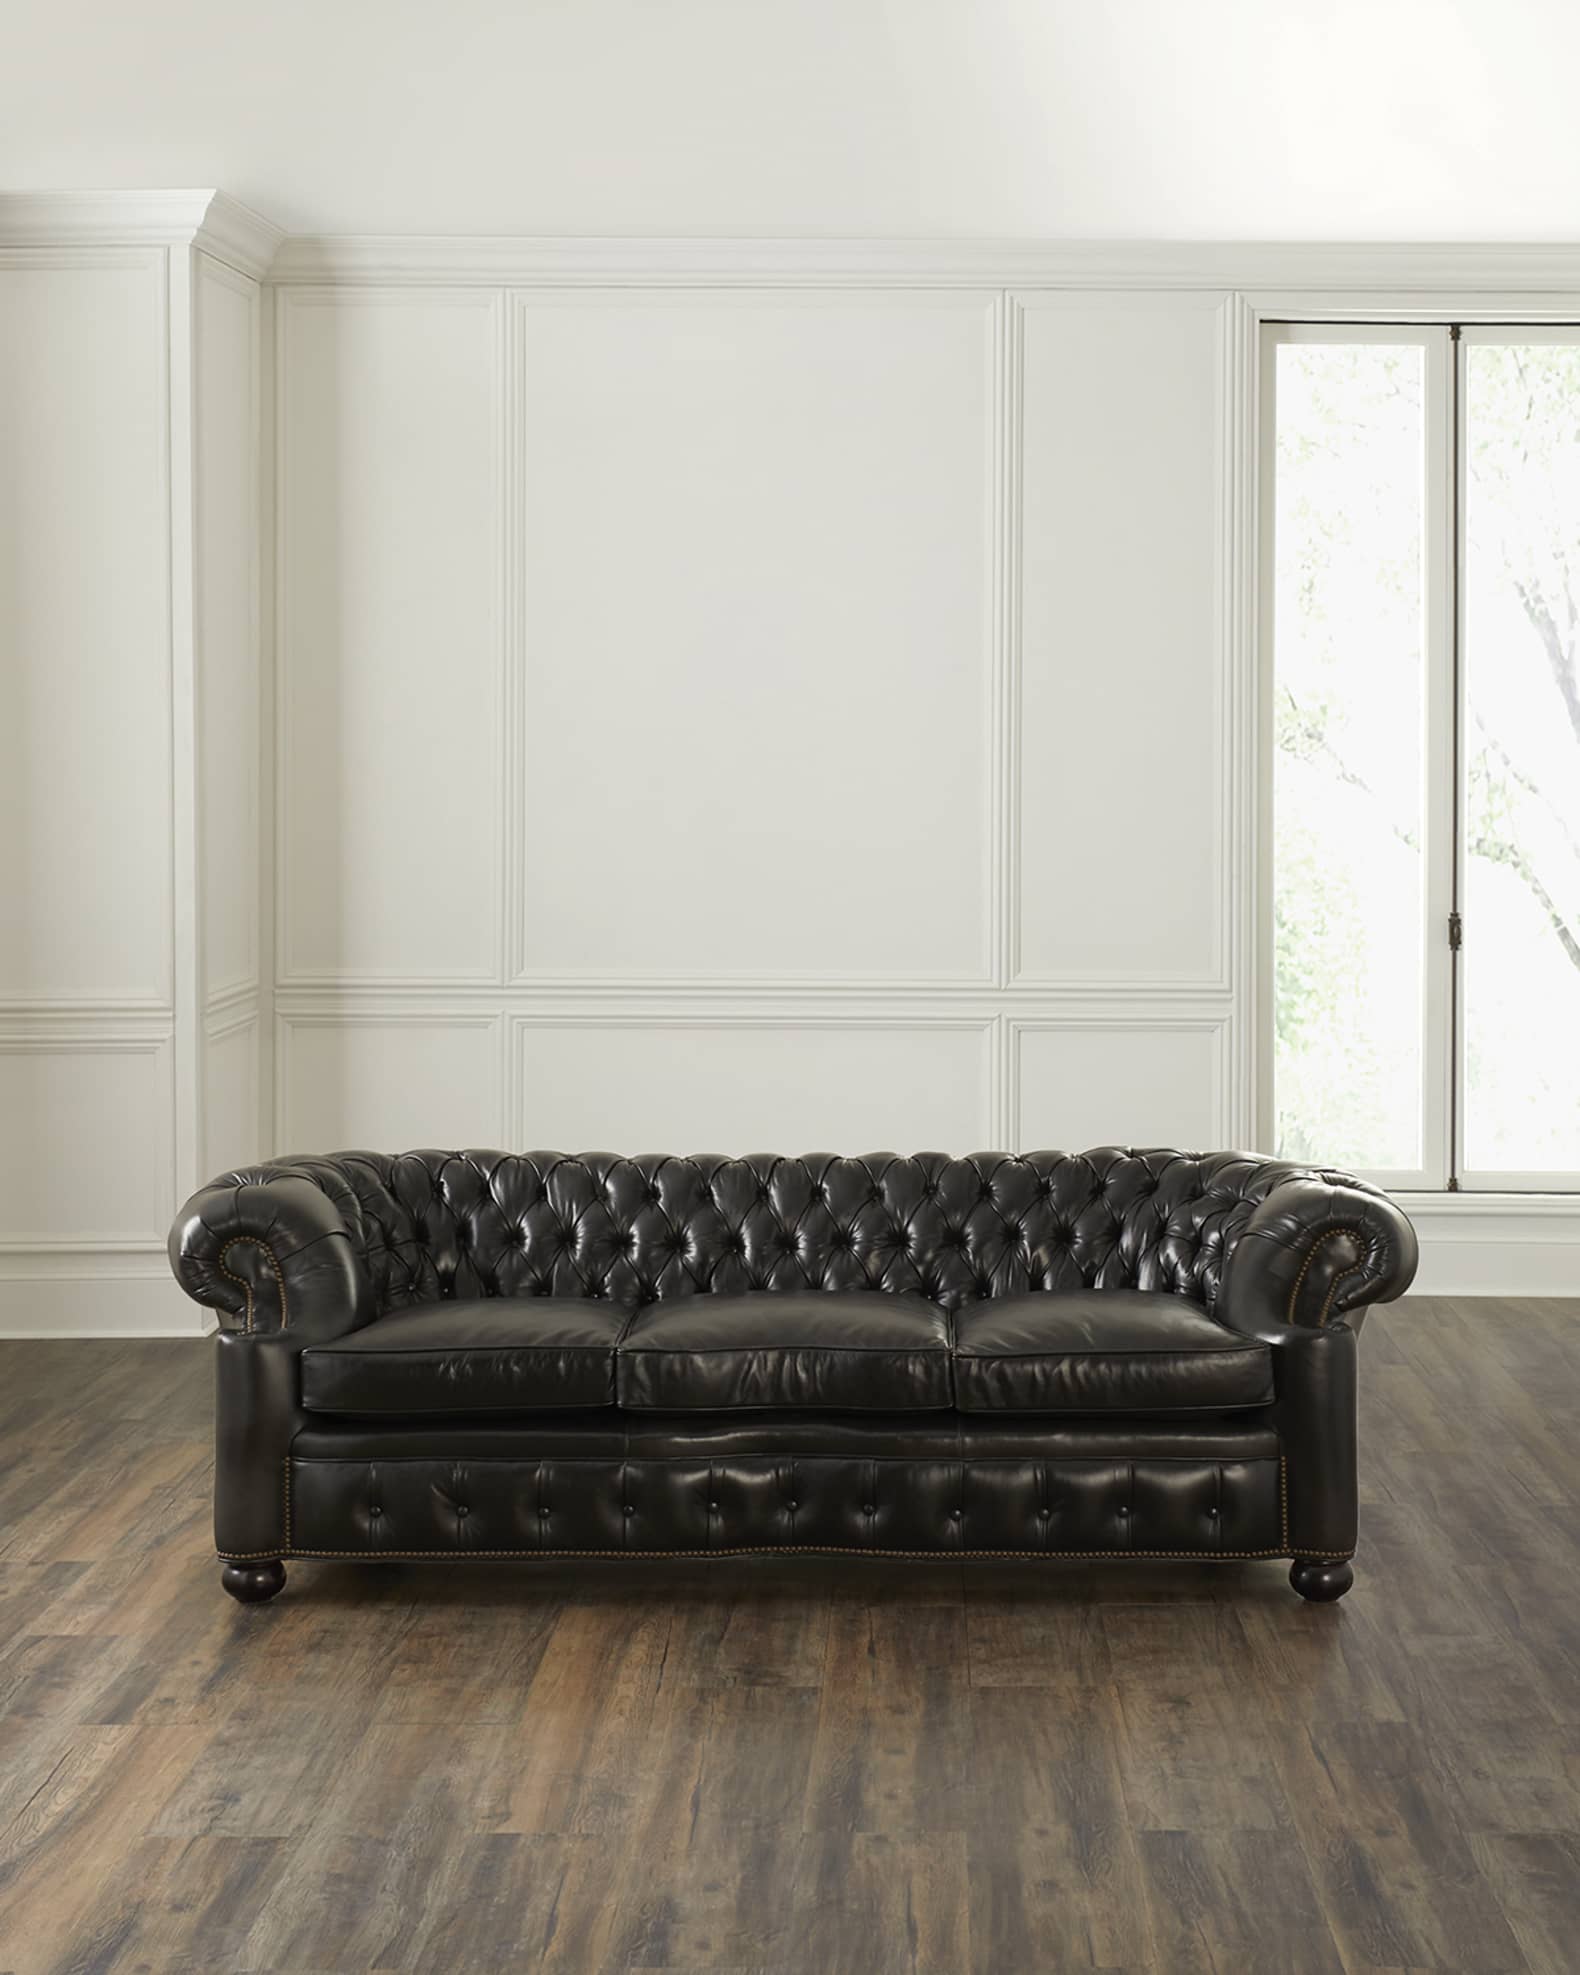 manuskript I virkeligheden Puno Old Hickory Tannery Rips Leather Chesterfield Sofa, 99.5" | Horchow